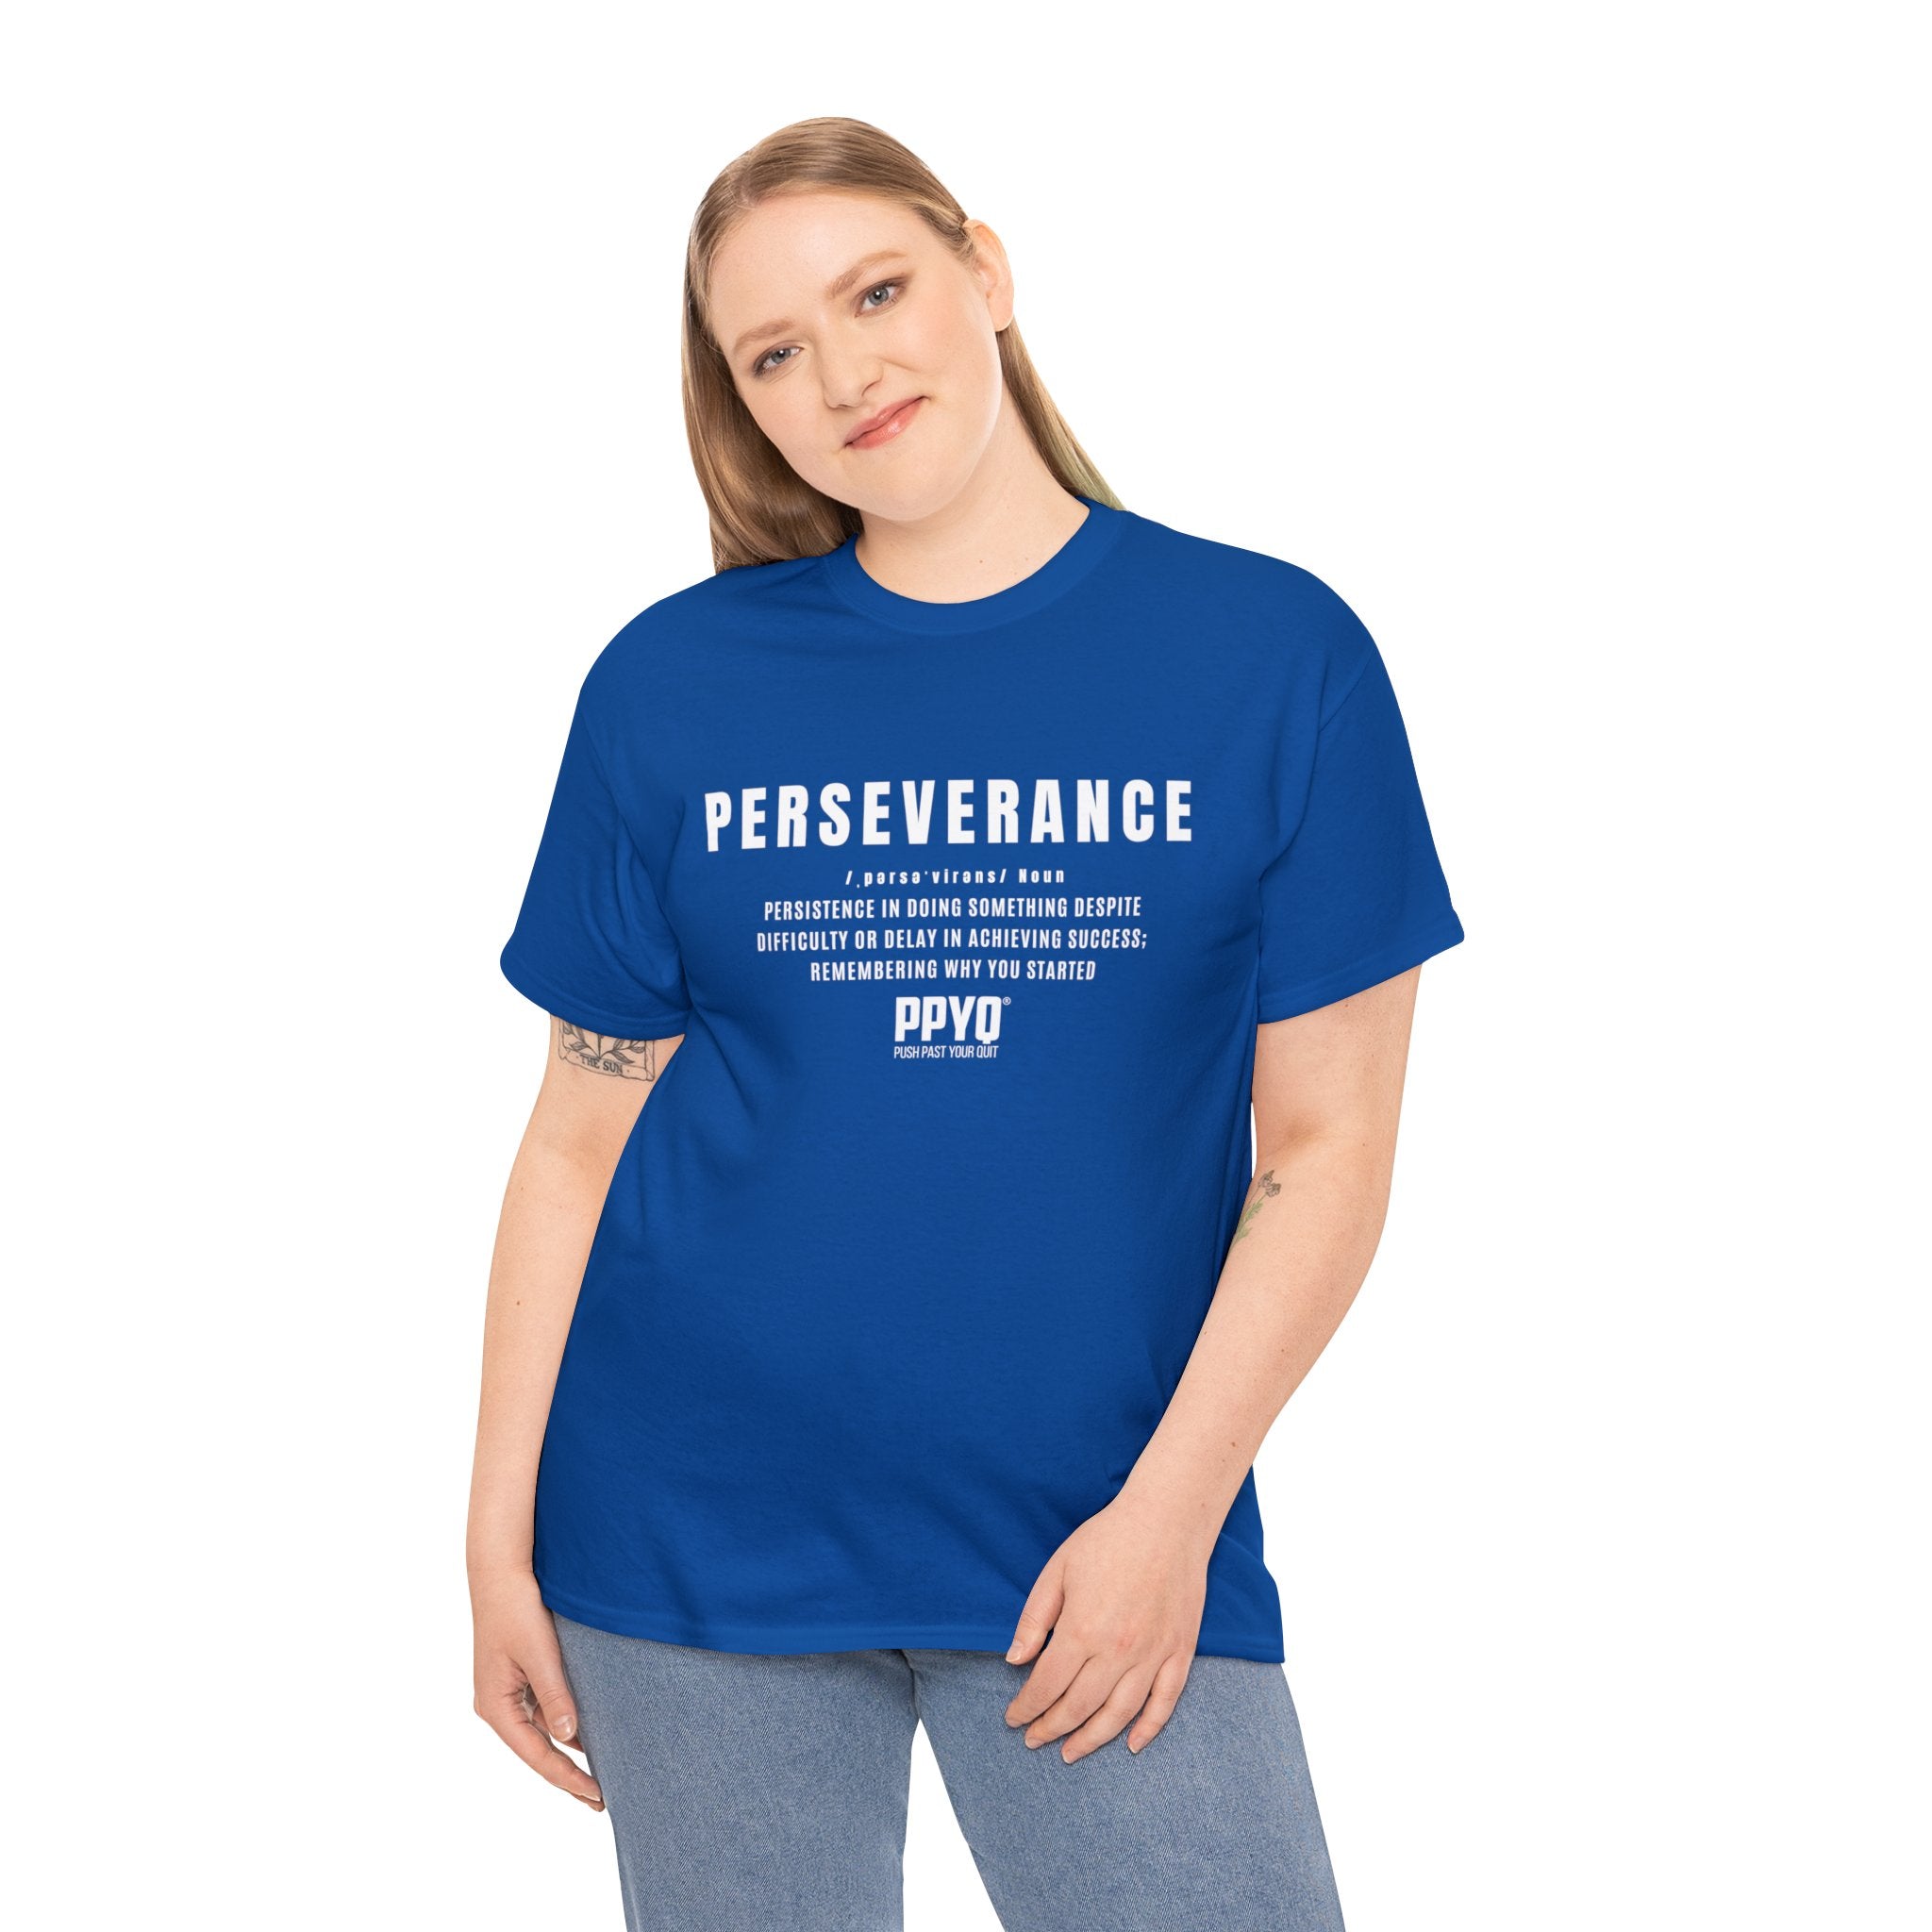 Perseverance PPYQ® Defined Tee